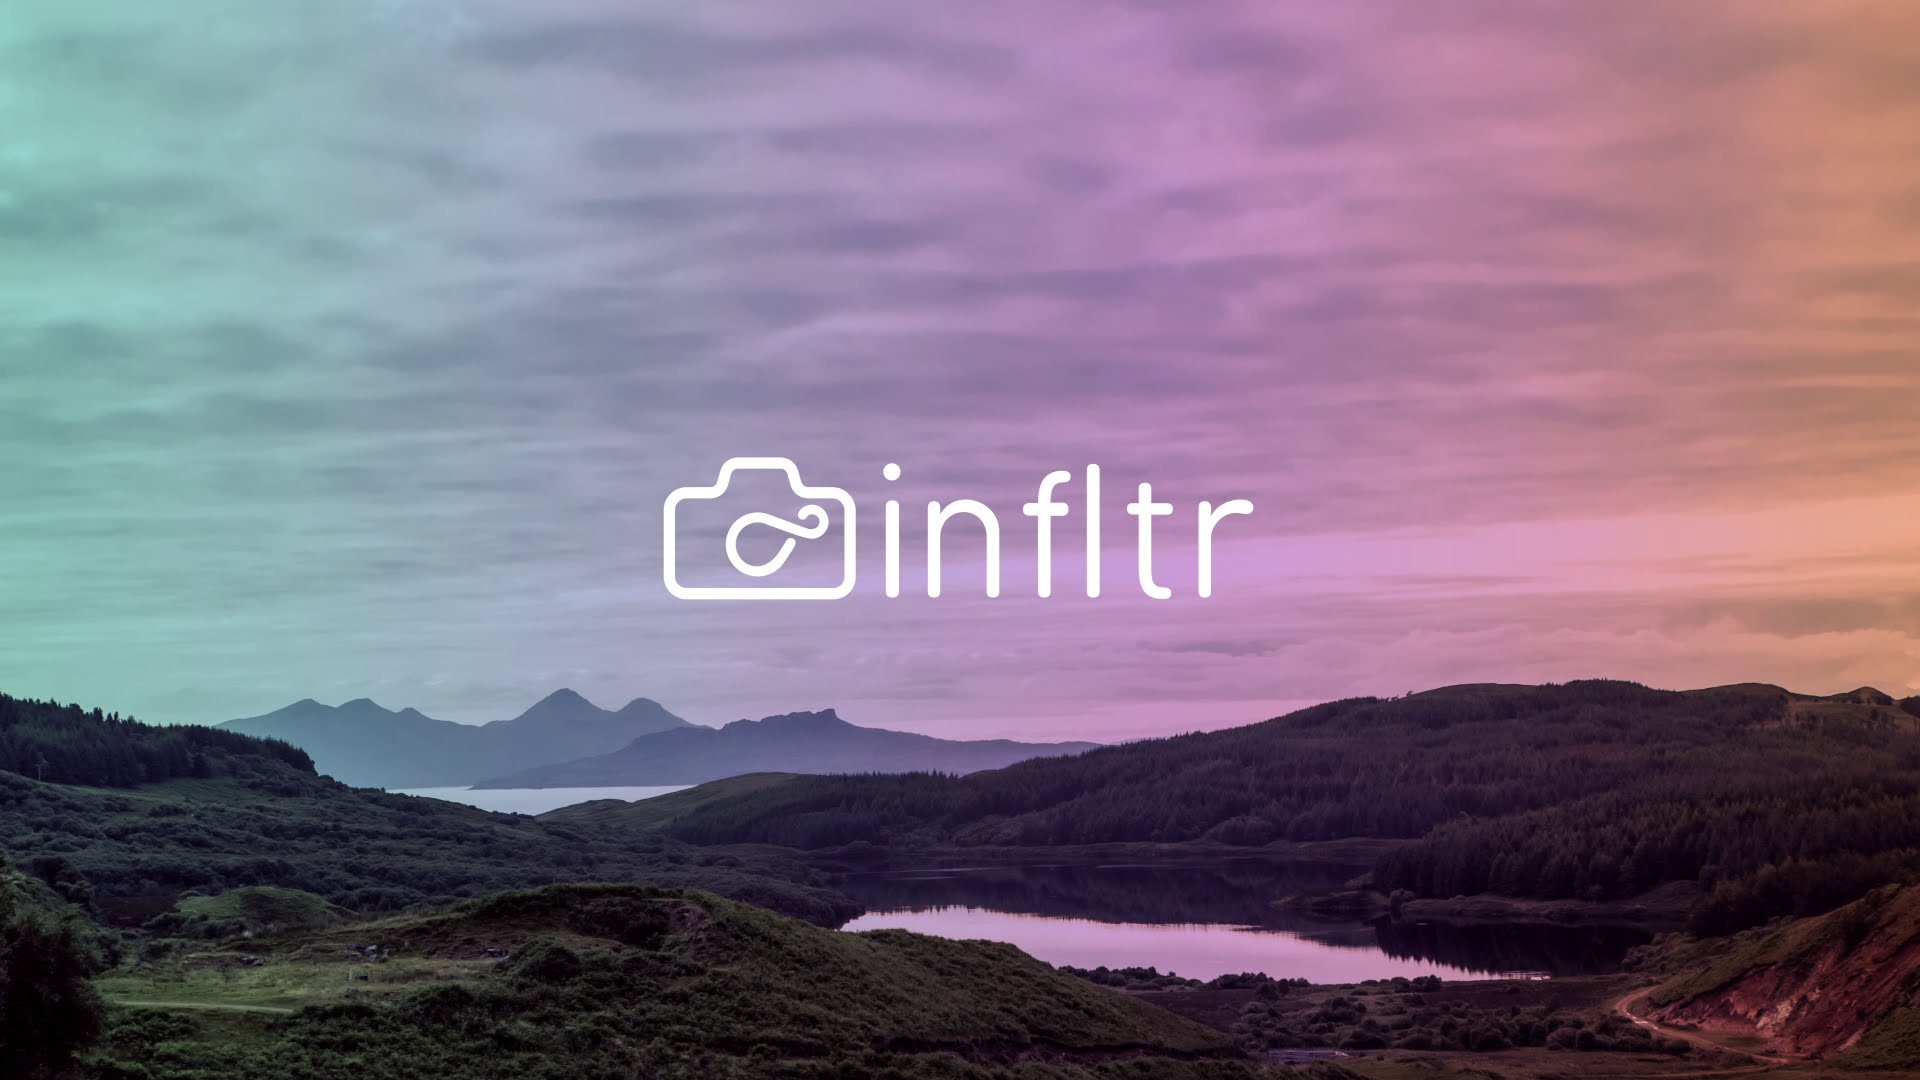 Infltr is now available for free until 15 August, Know how to download it